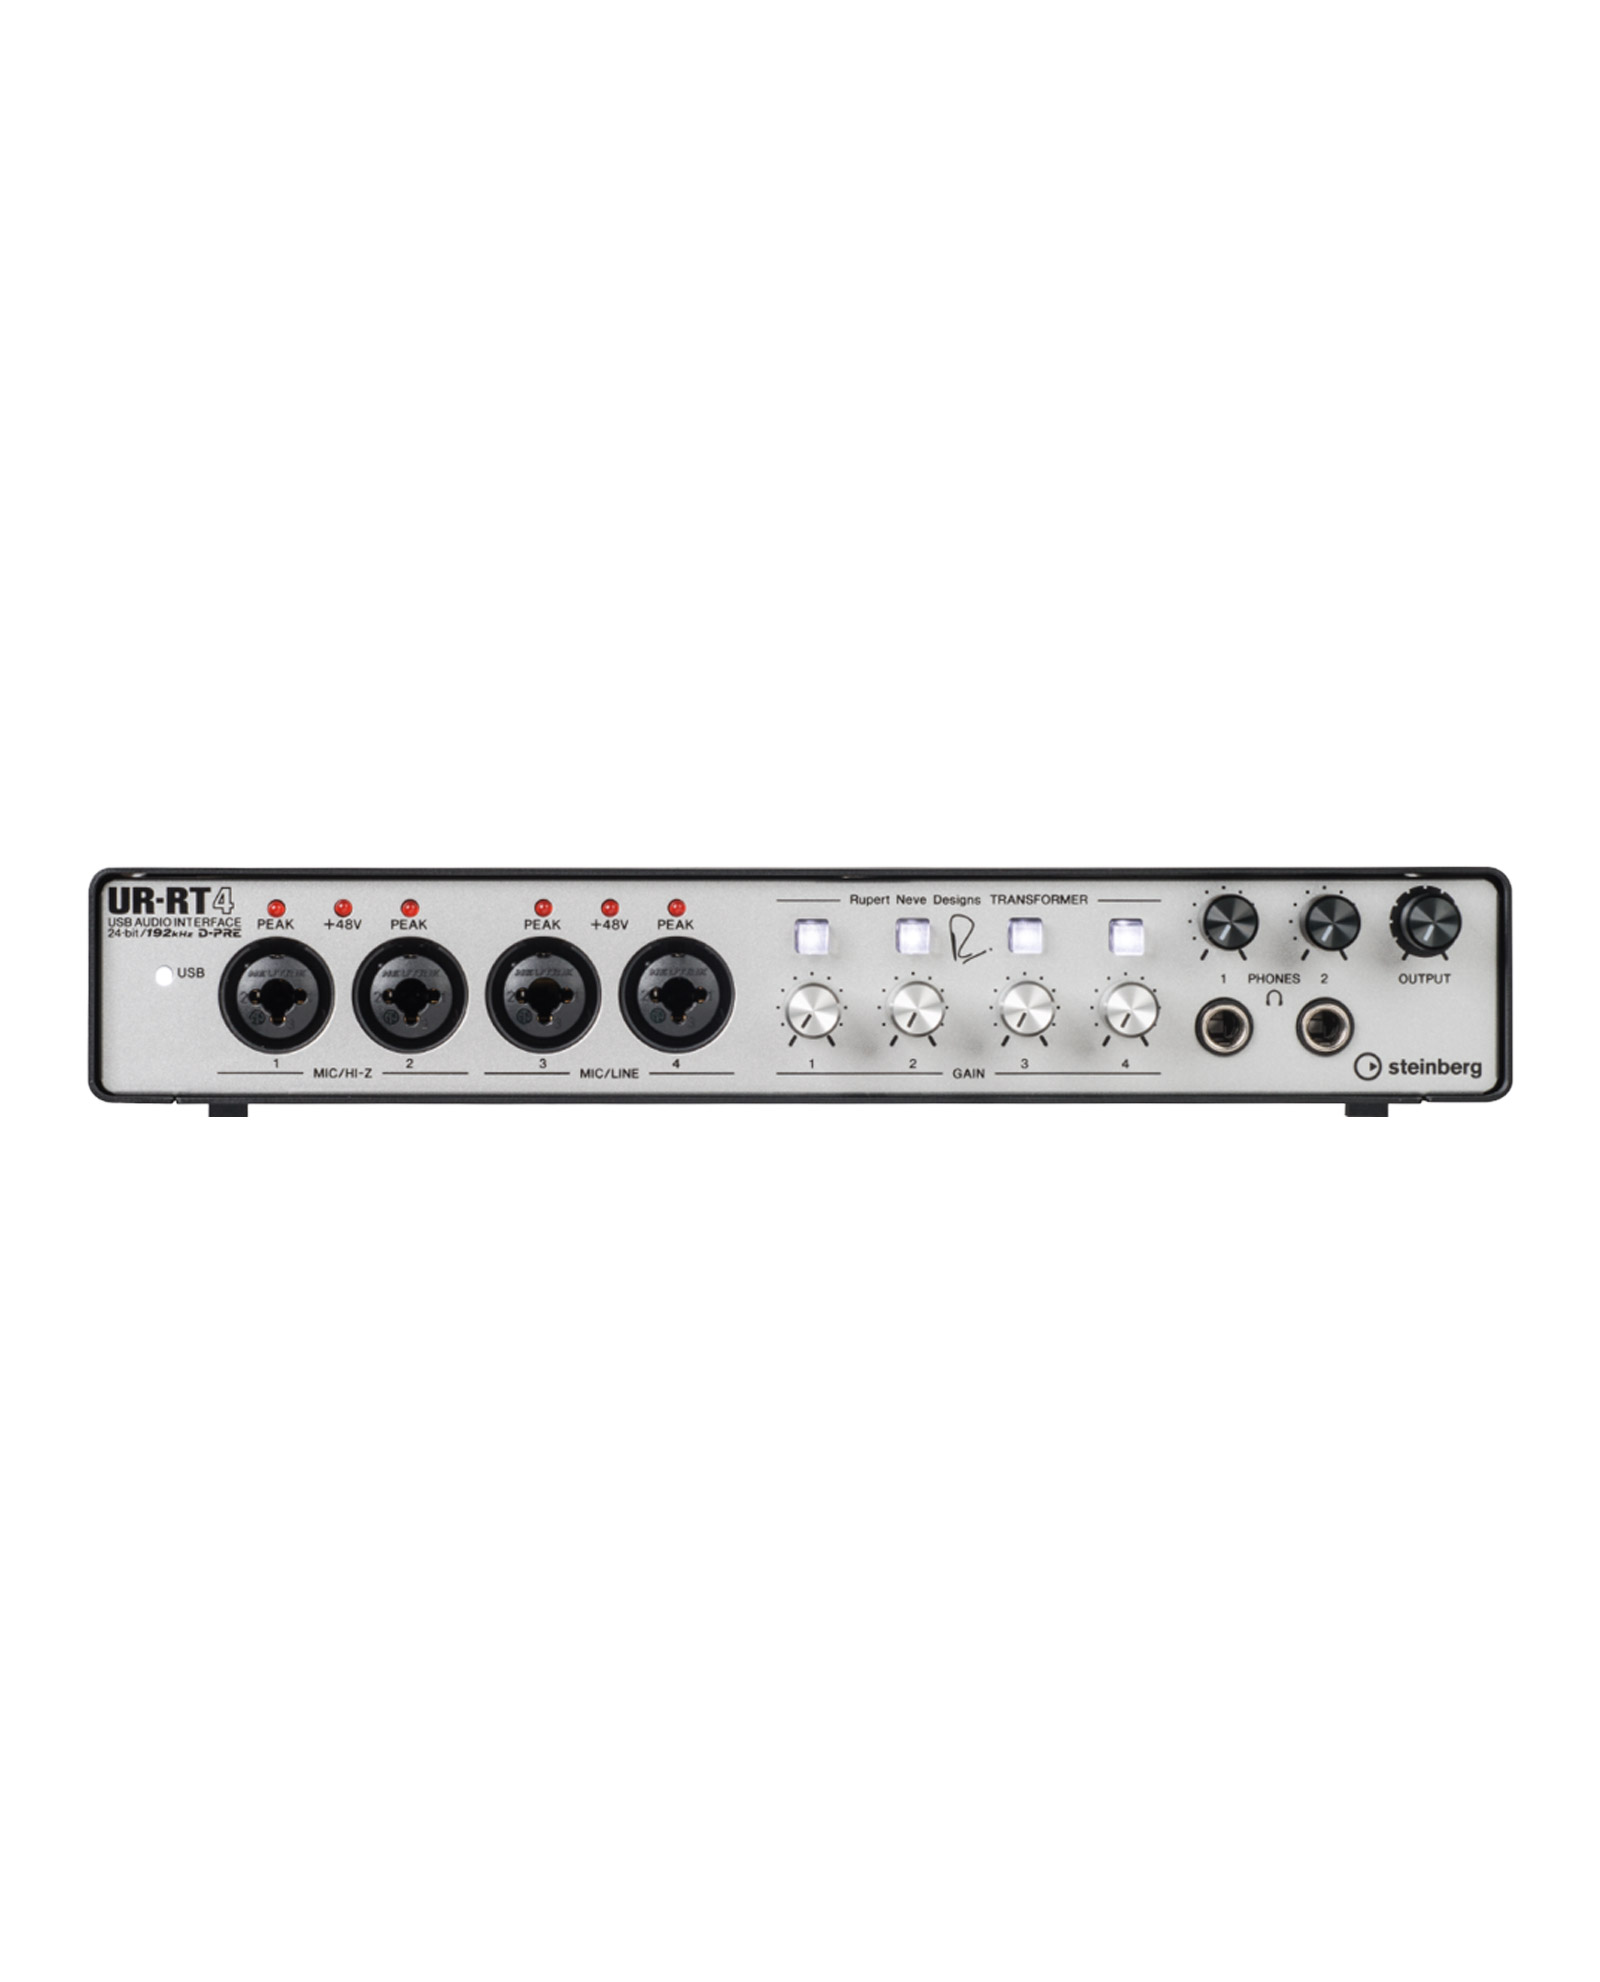 Steinberg Ur Rt4 Audio Interface With Rupert Neve Transformers Front